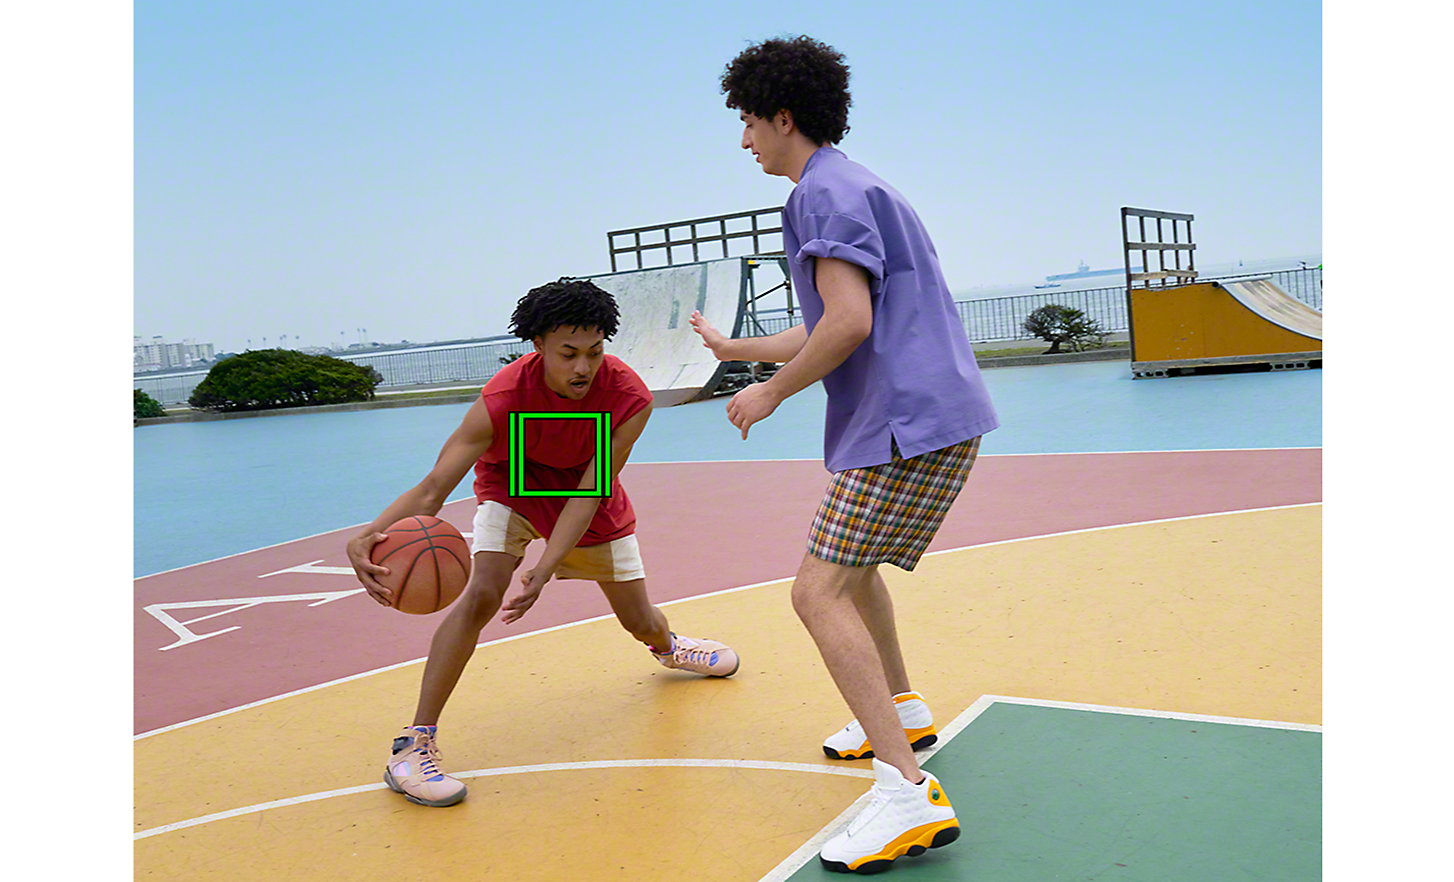 A one-on-one basketball game, a green square denoting Real-time Tracking